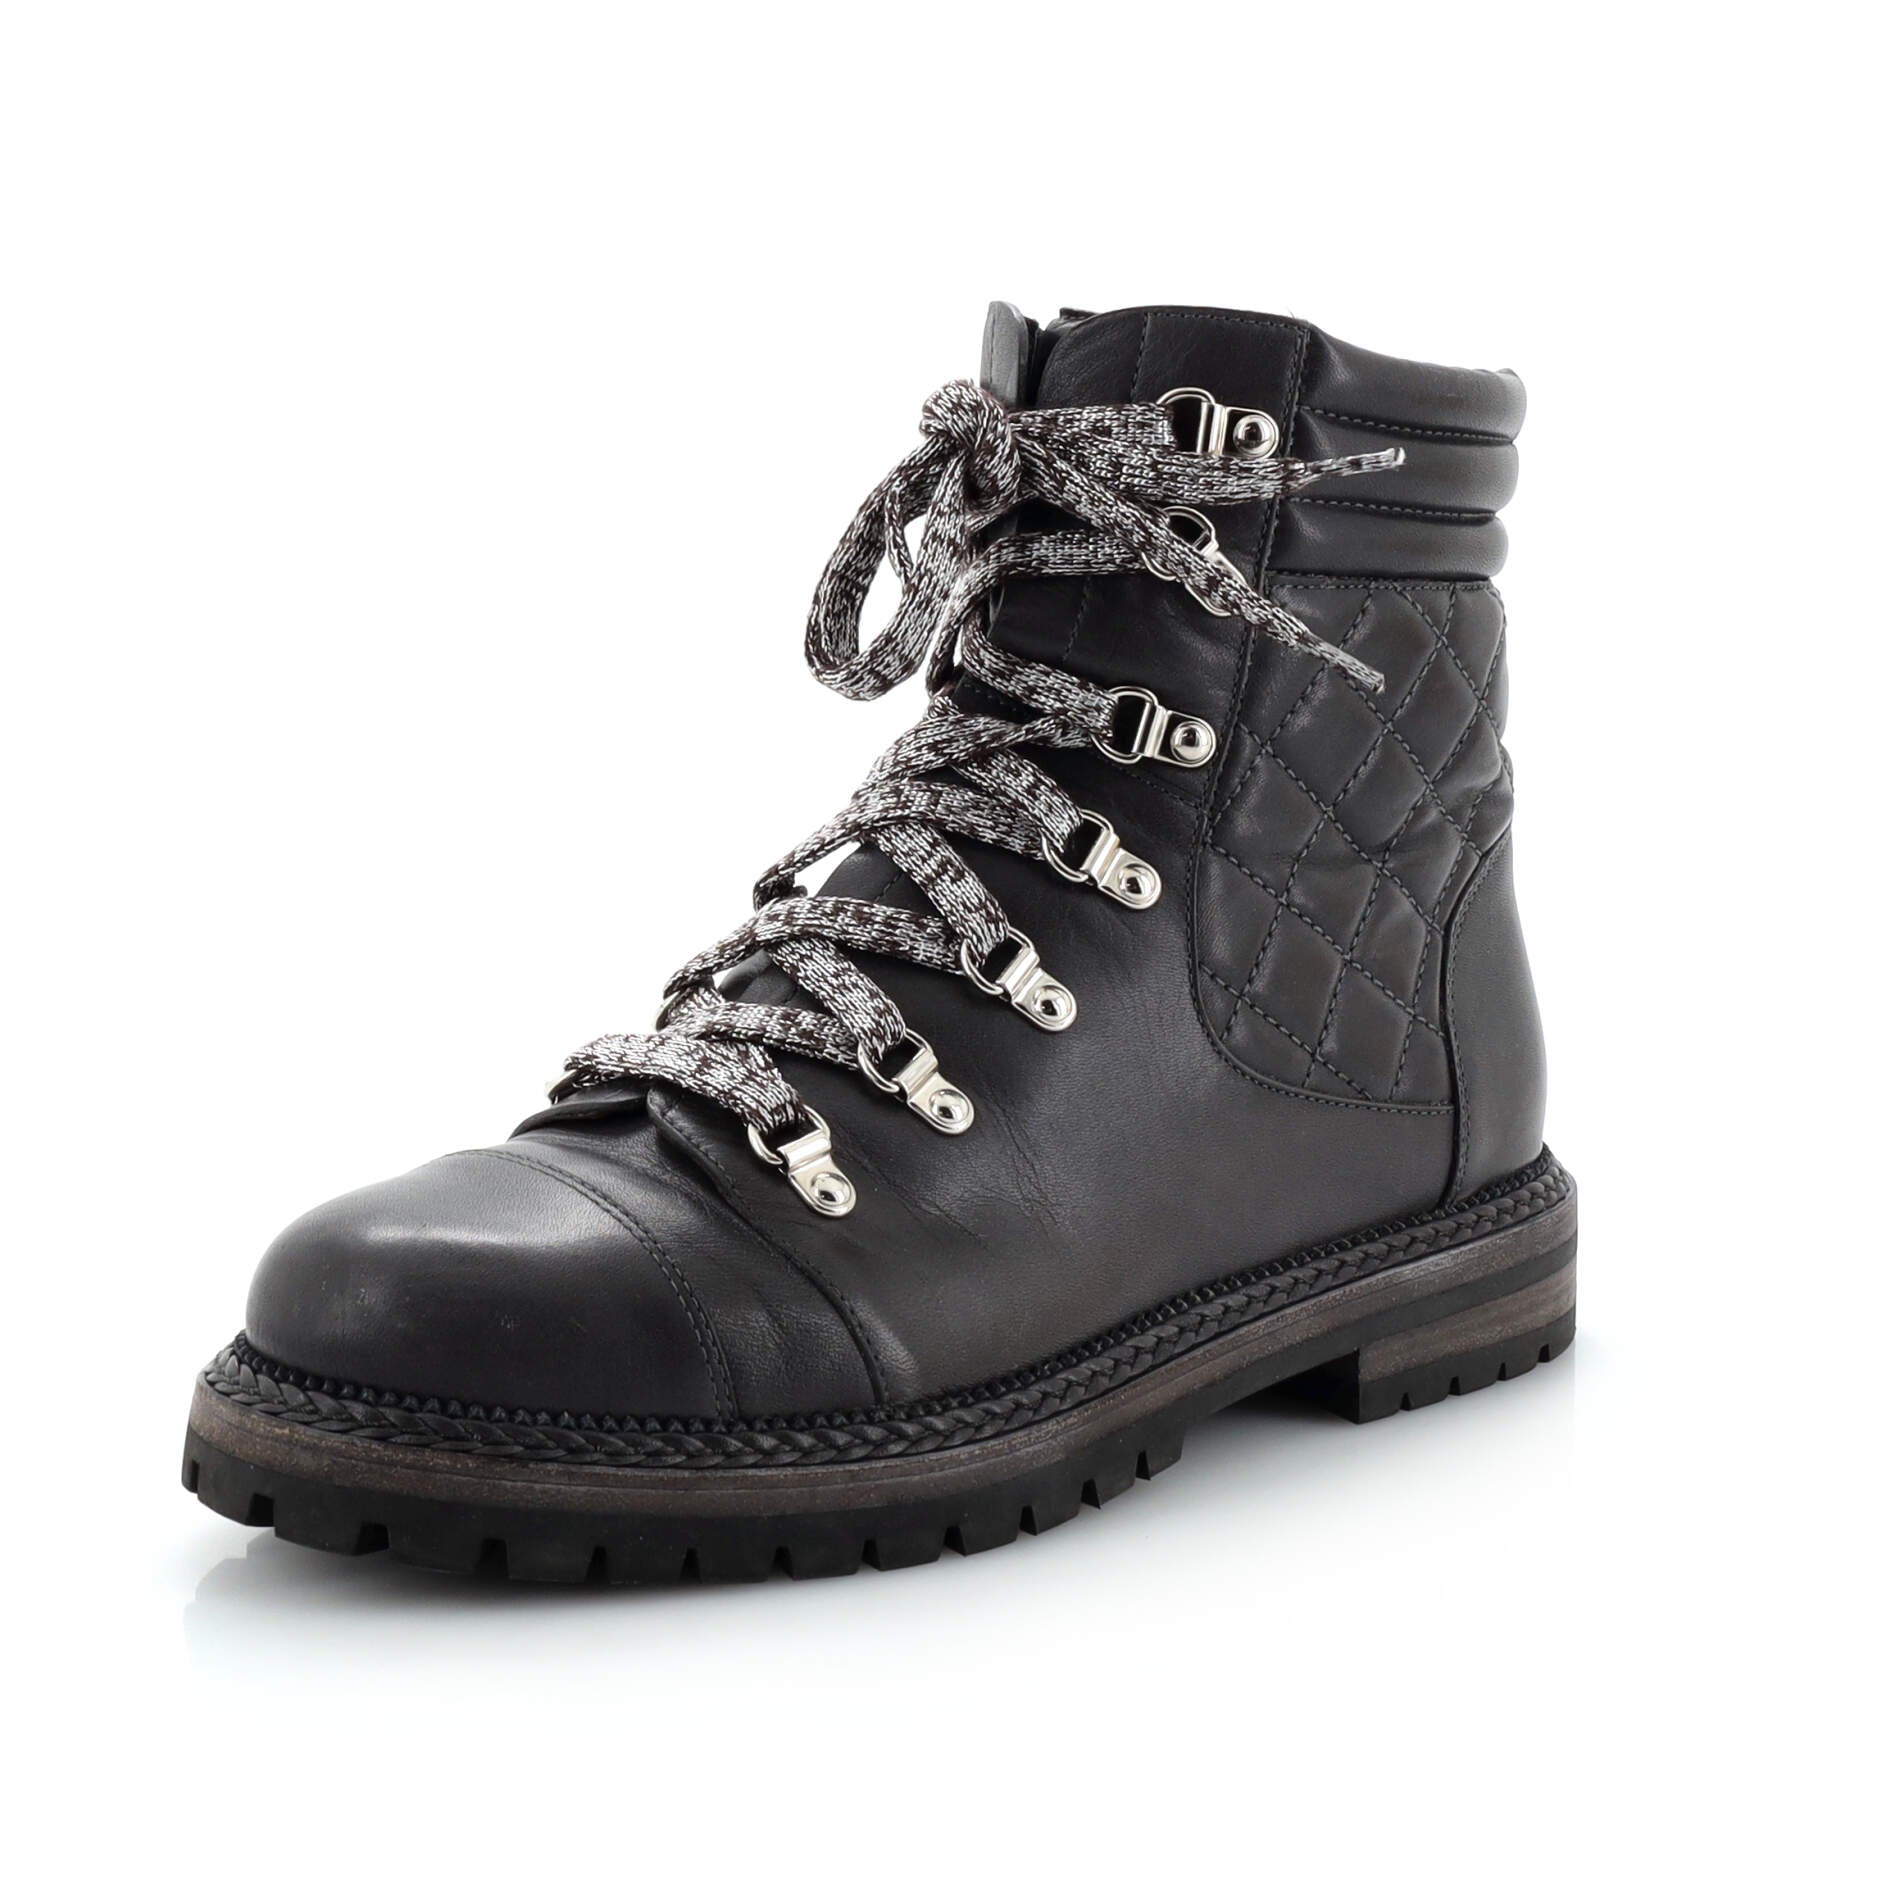 Women's Cap Toe Combat Boots Quilted Leather